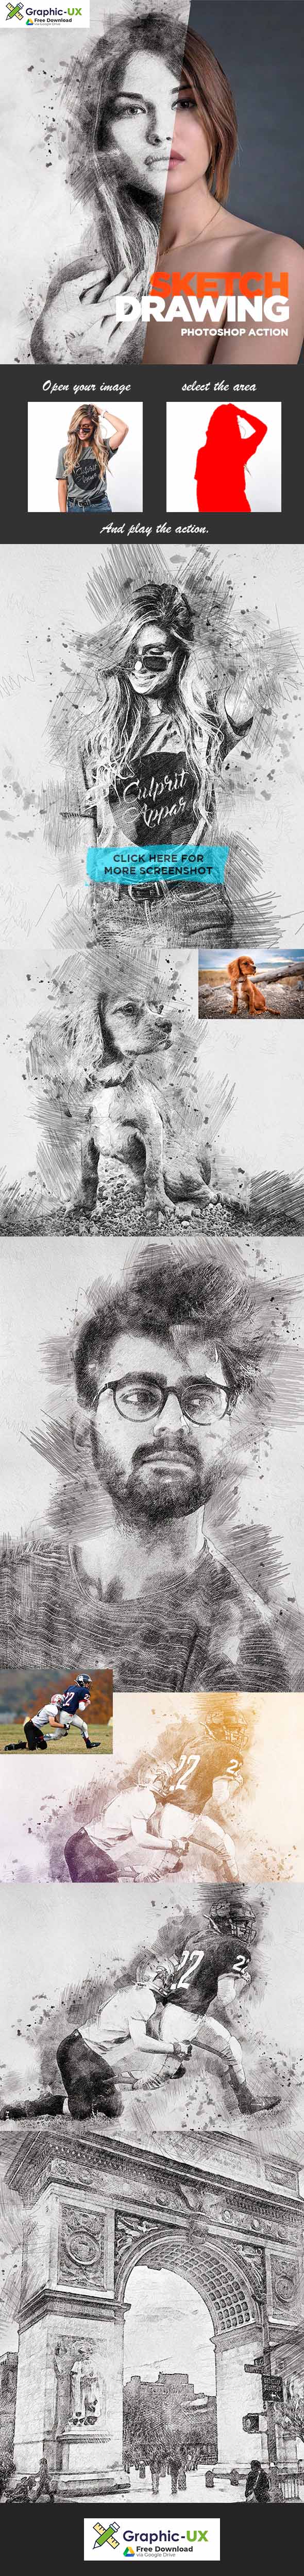 Sketch Drawing - Photoshop Action